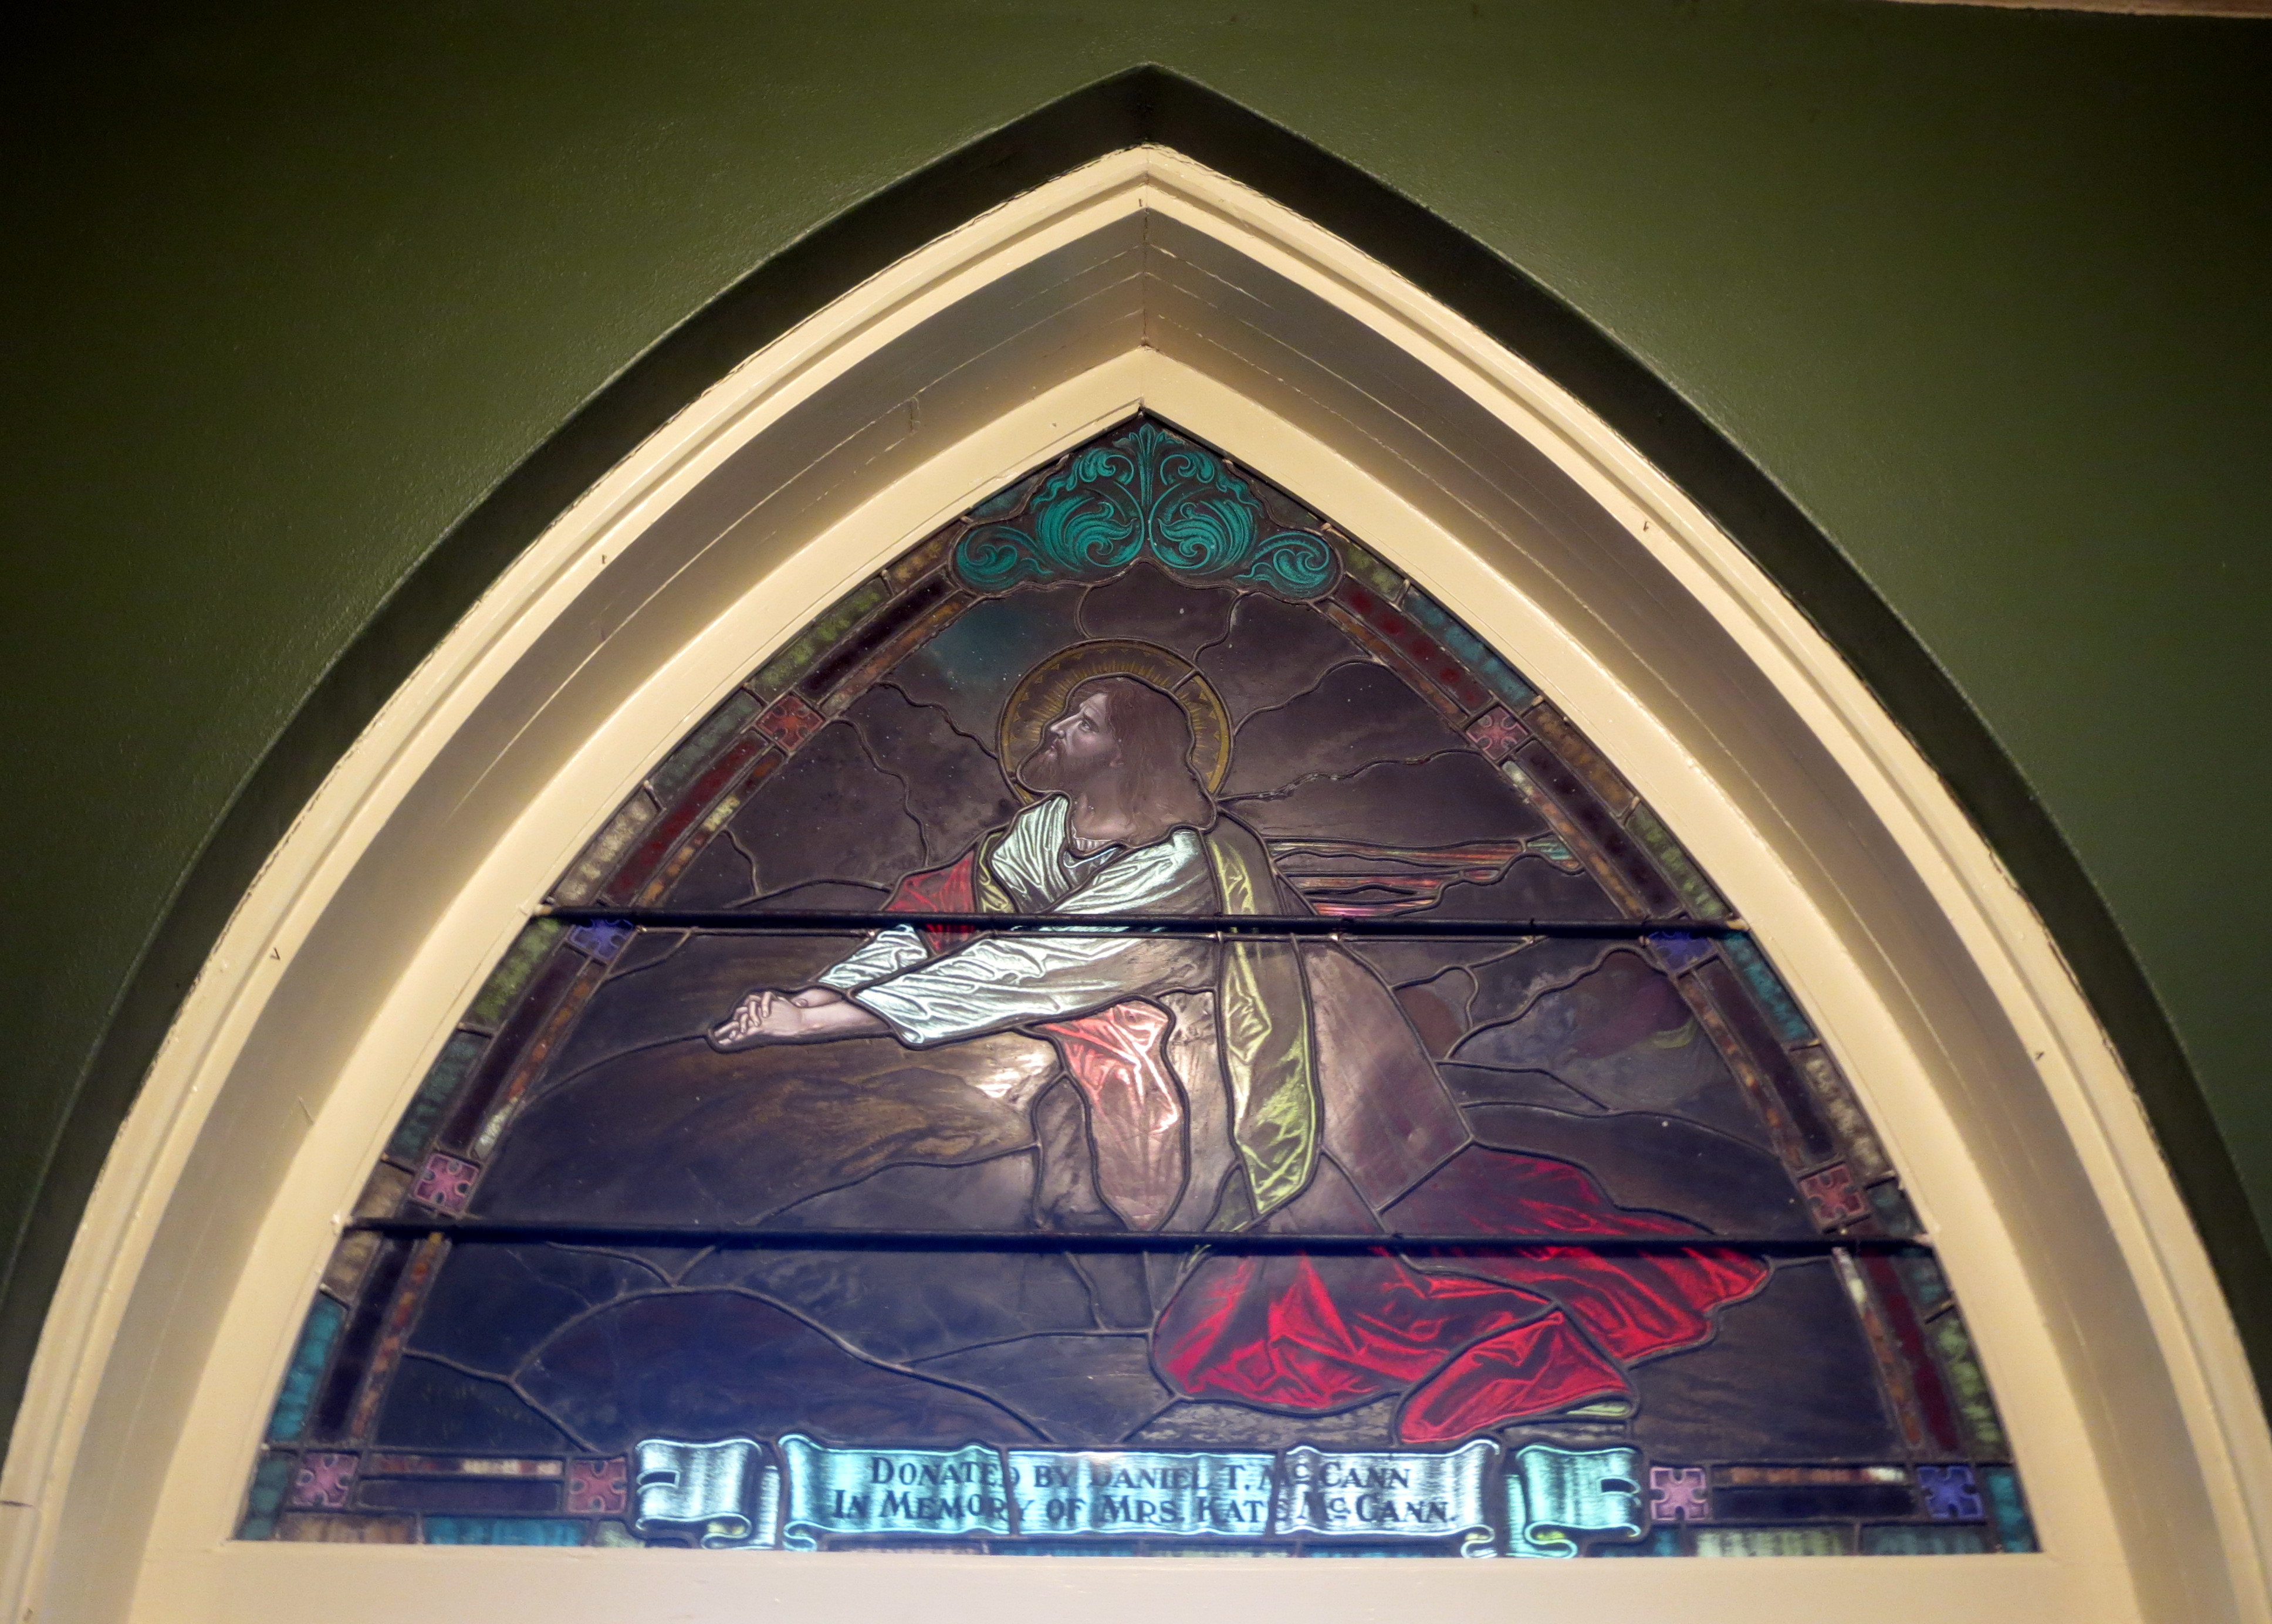 Saint Patrick Catholic Church (Junction City, Ohio) - stained glass, tympanum - The Agony in the Garden